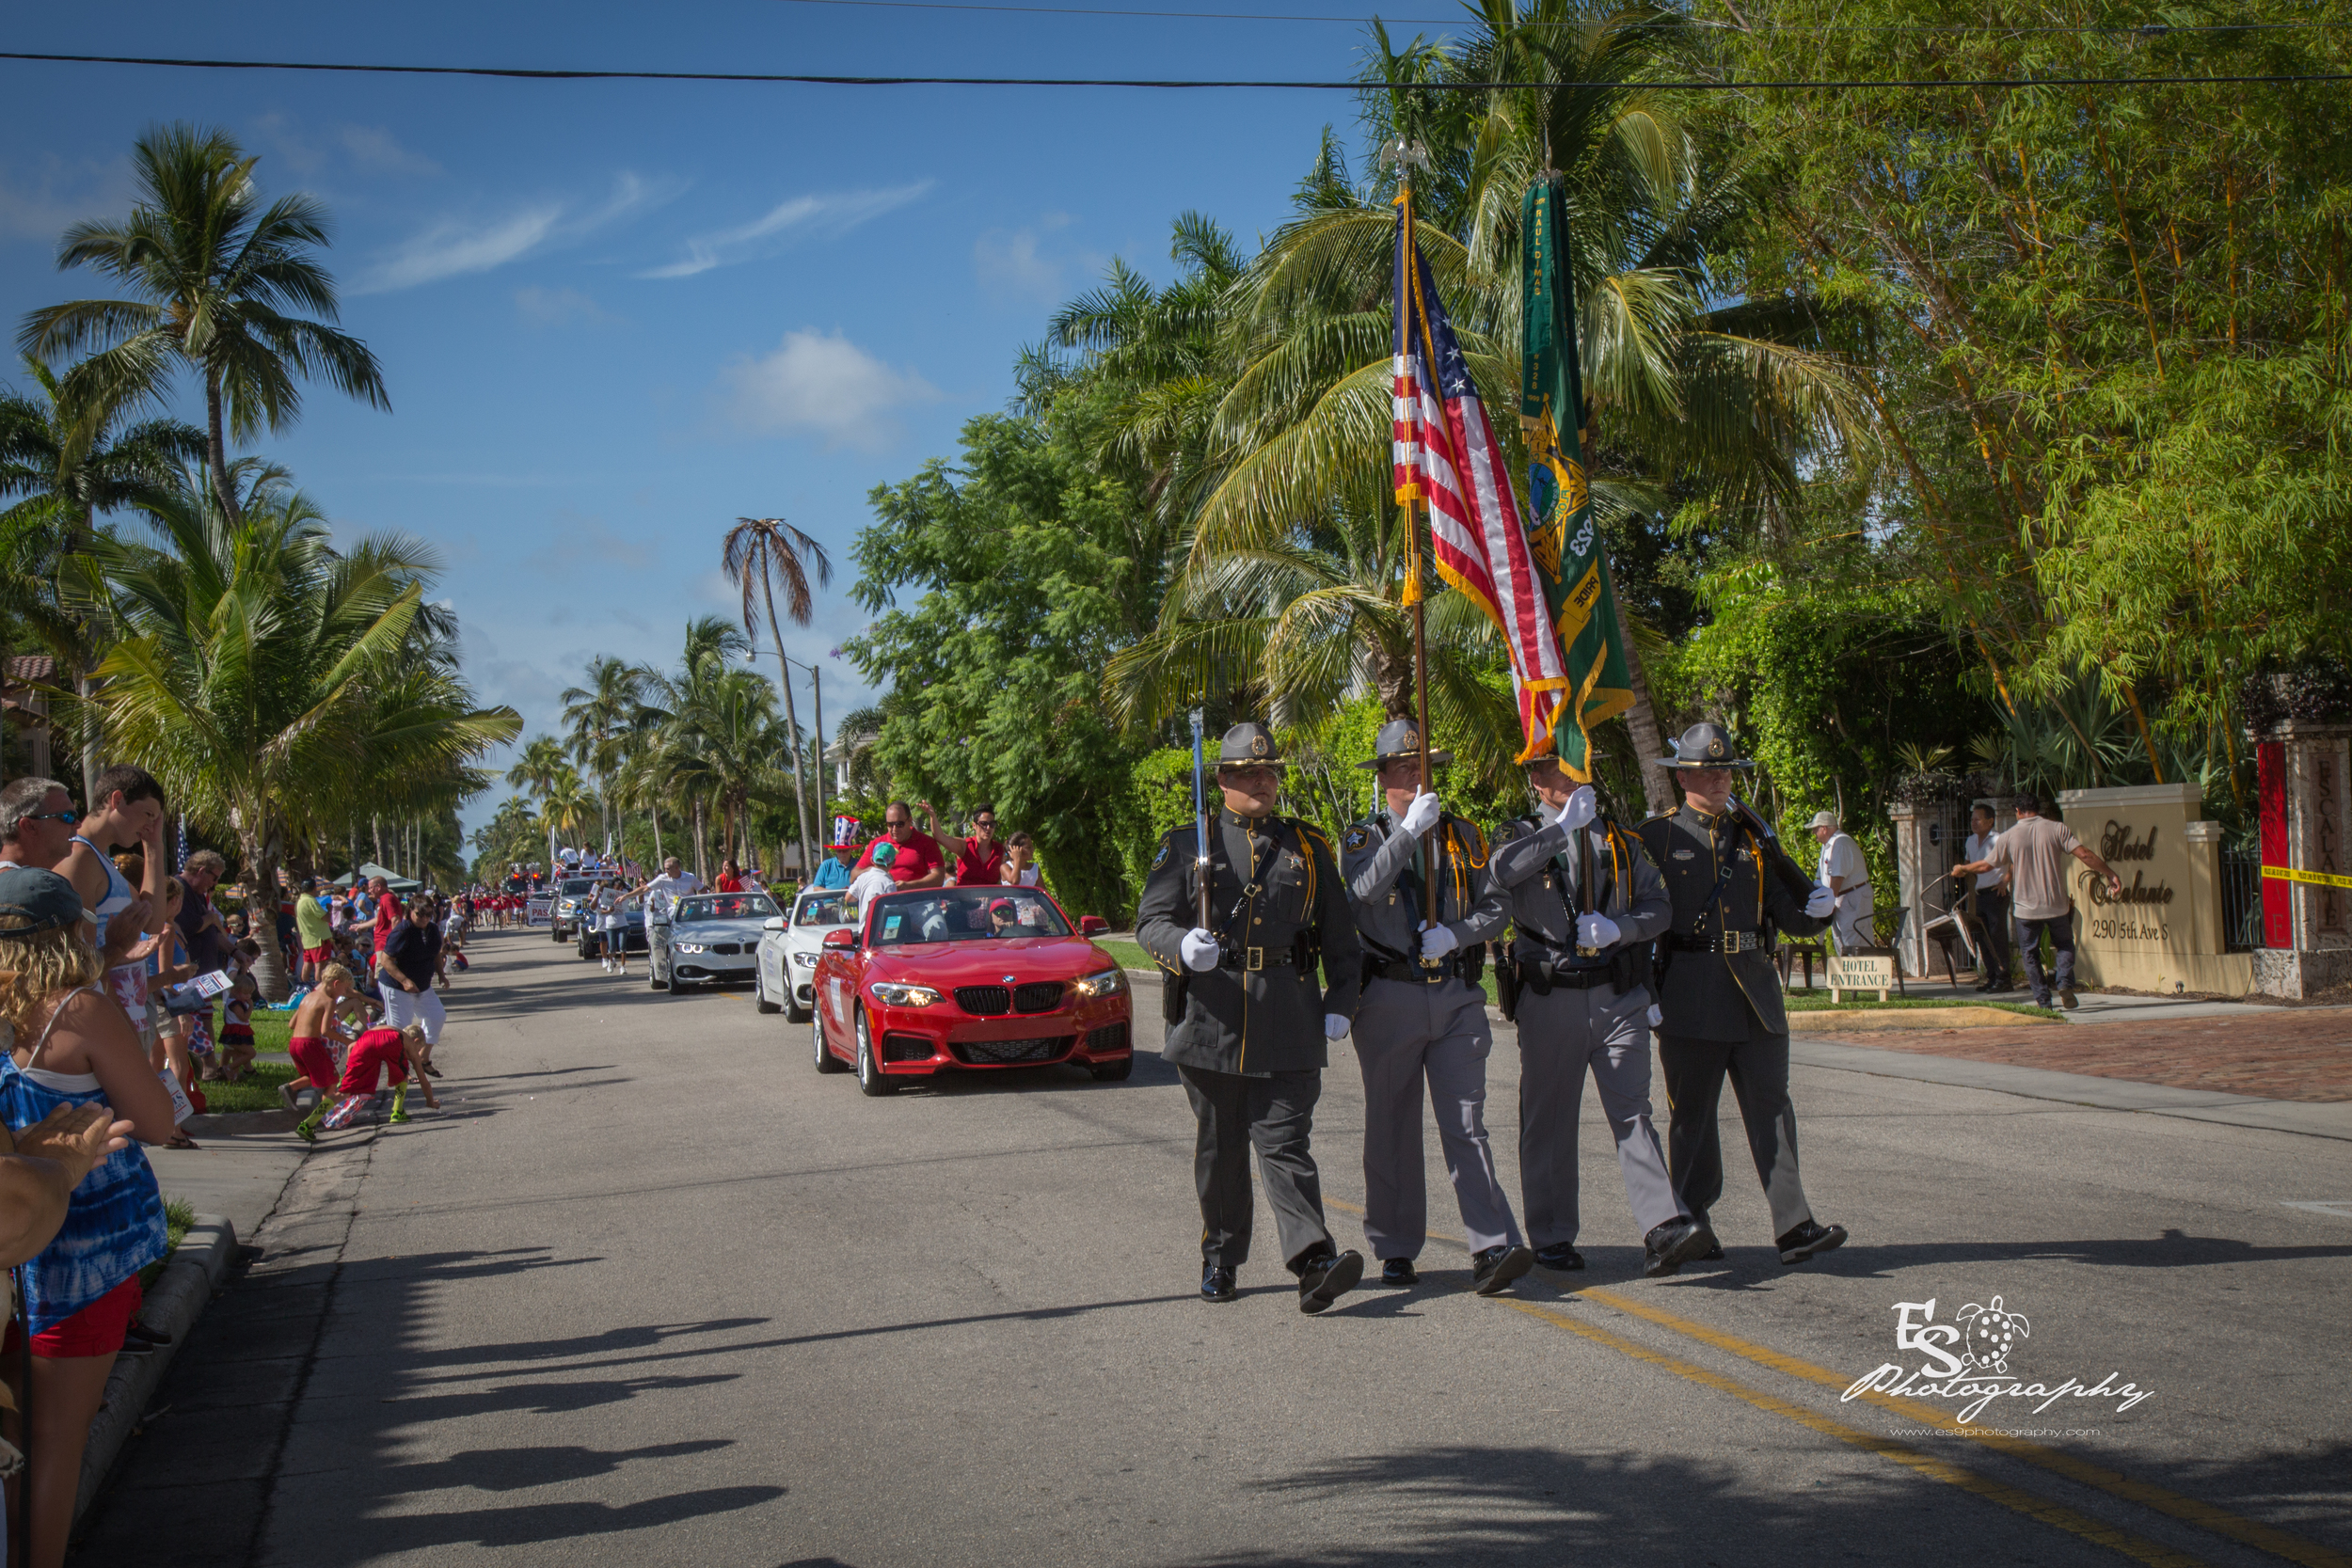 City of Naples July 4th Parade 2016 @ ES9 Photography 2016-2.jpg